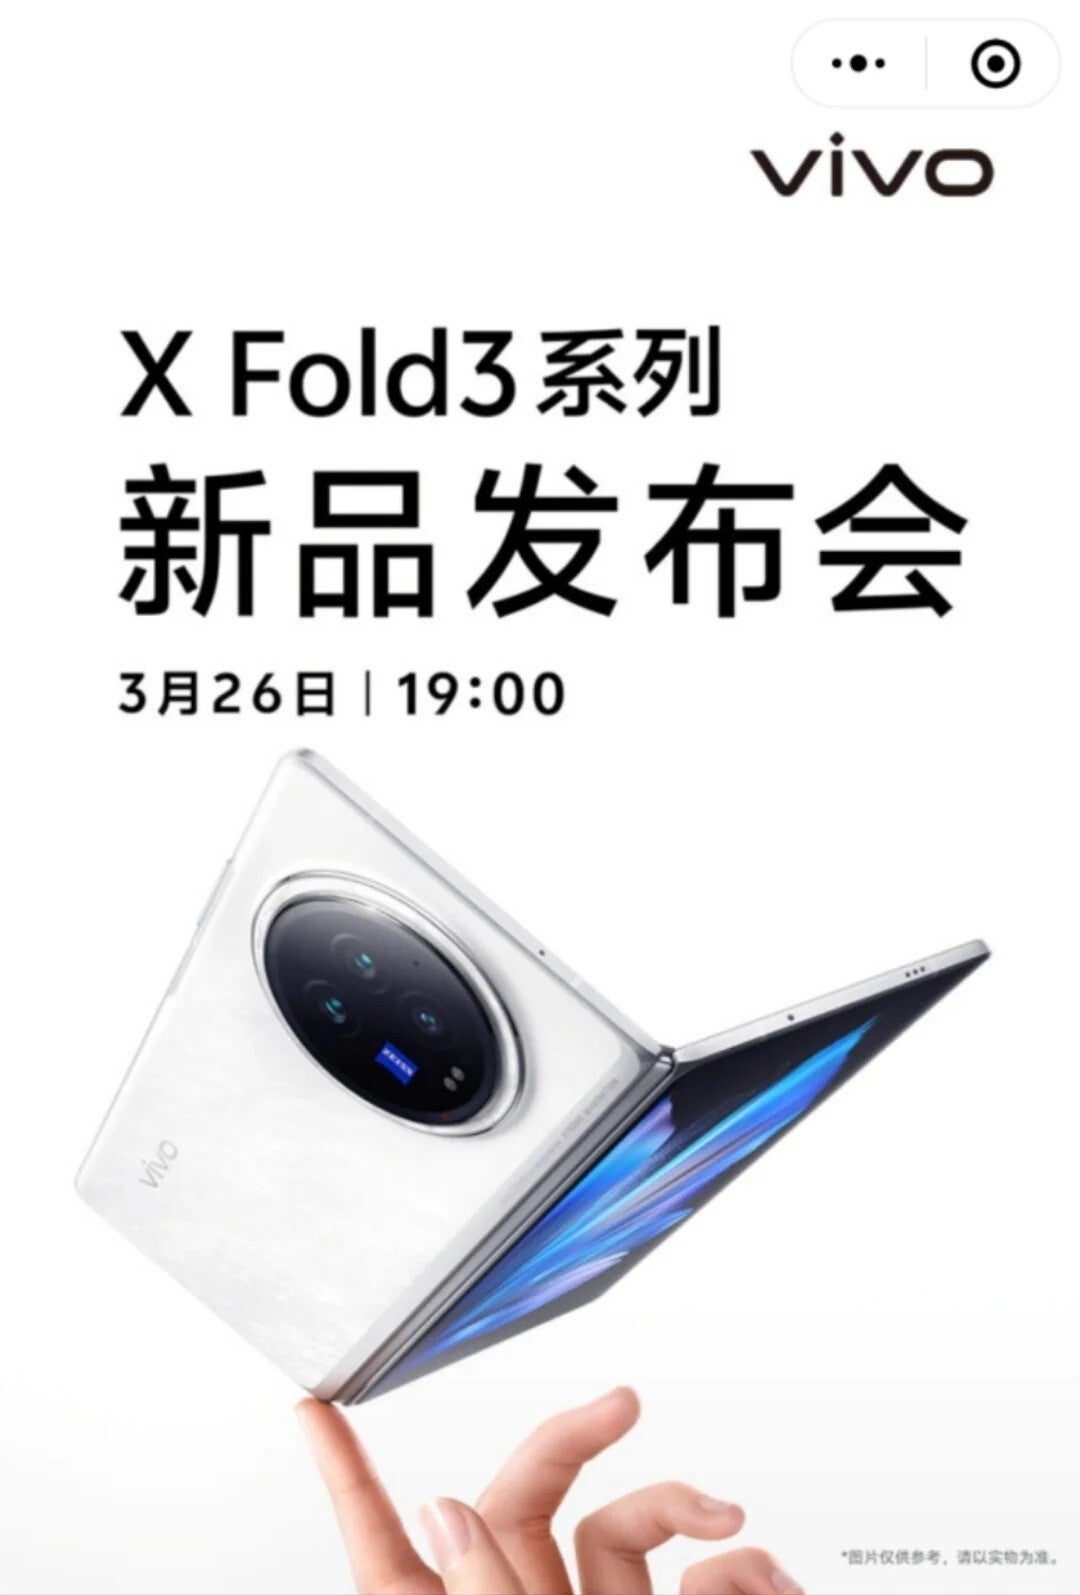 Vivo X Fold 3 series should launch in just over a week: check out the exact date